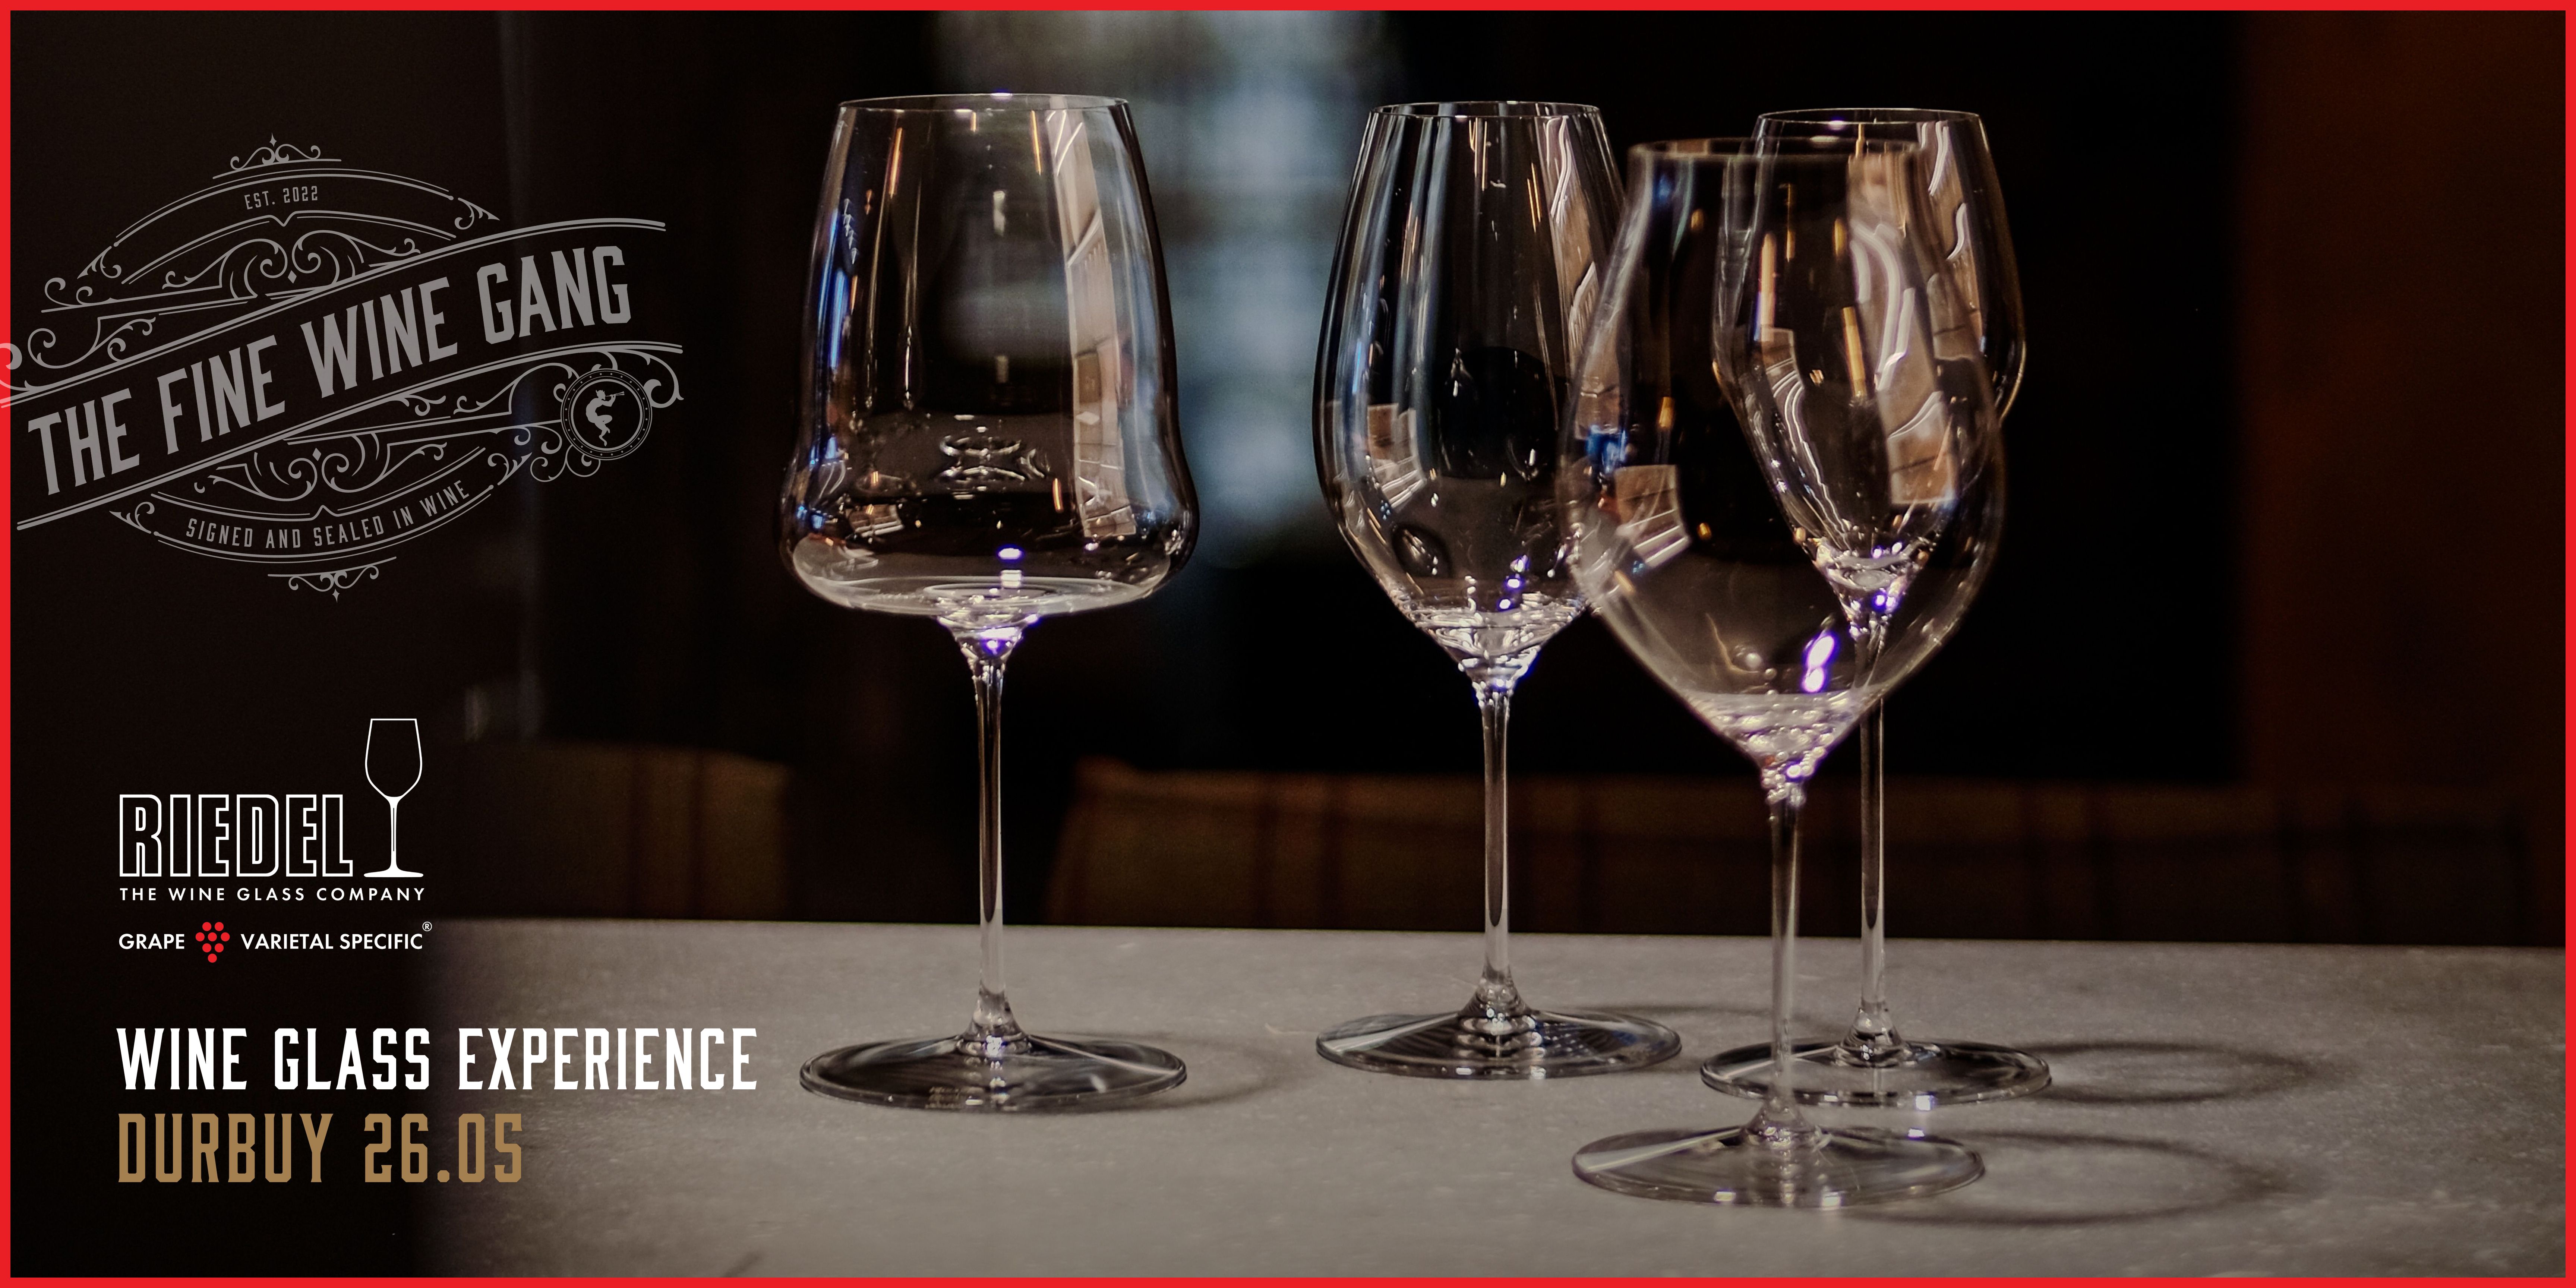 Riedel Wine glass experience